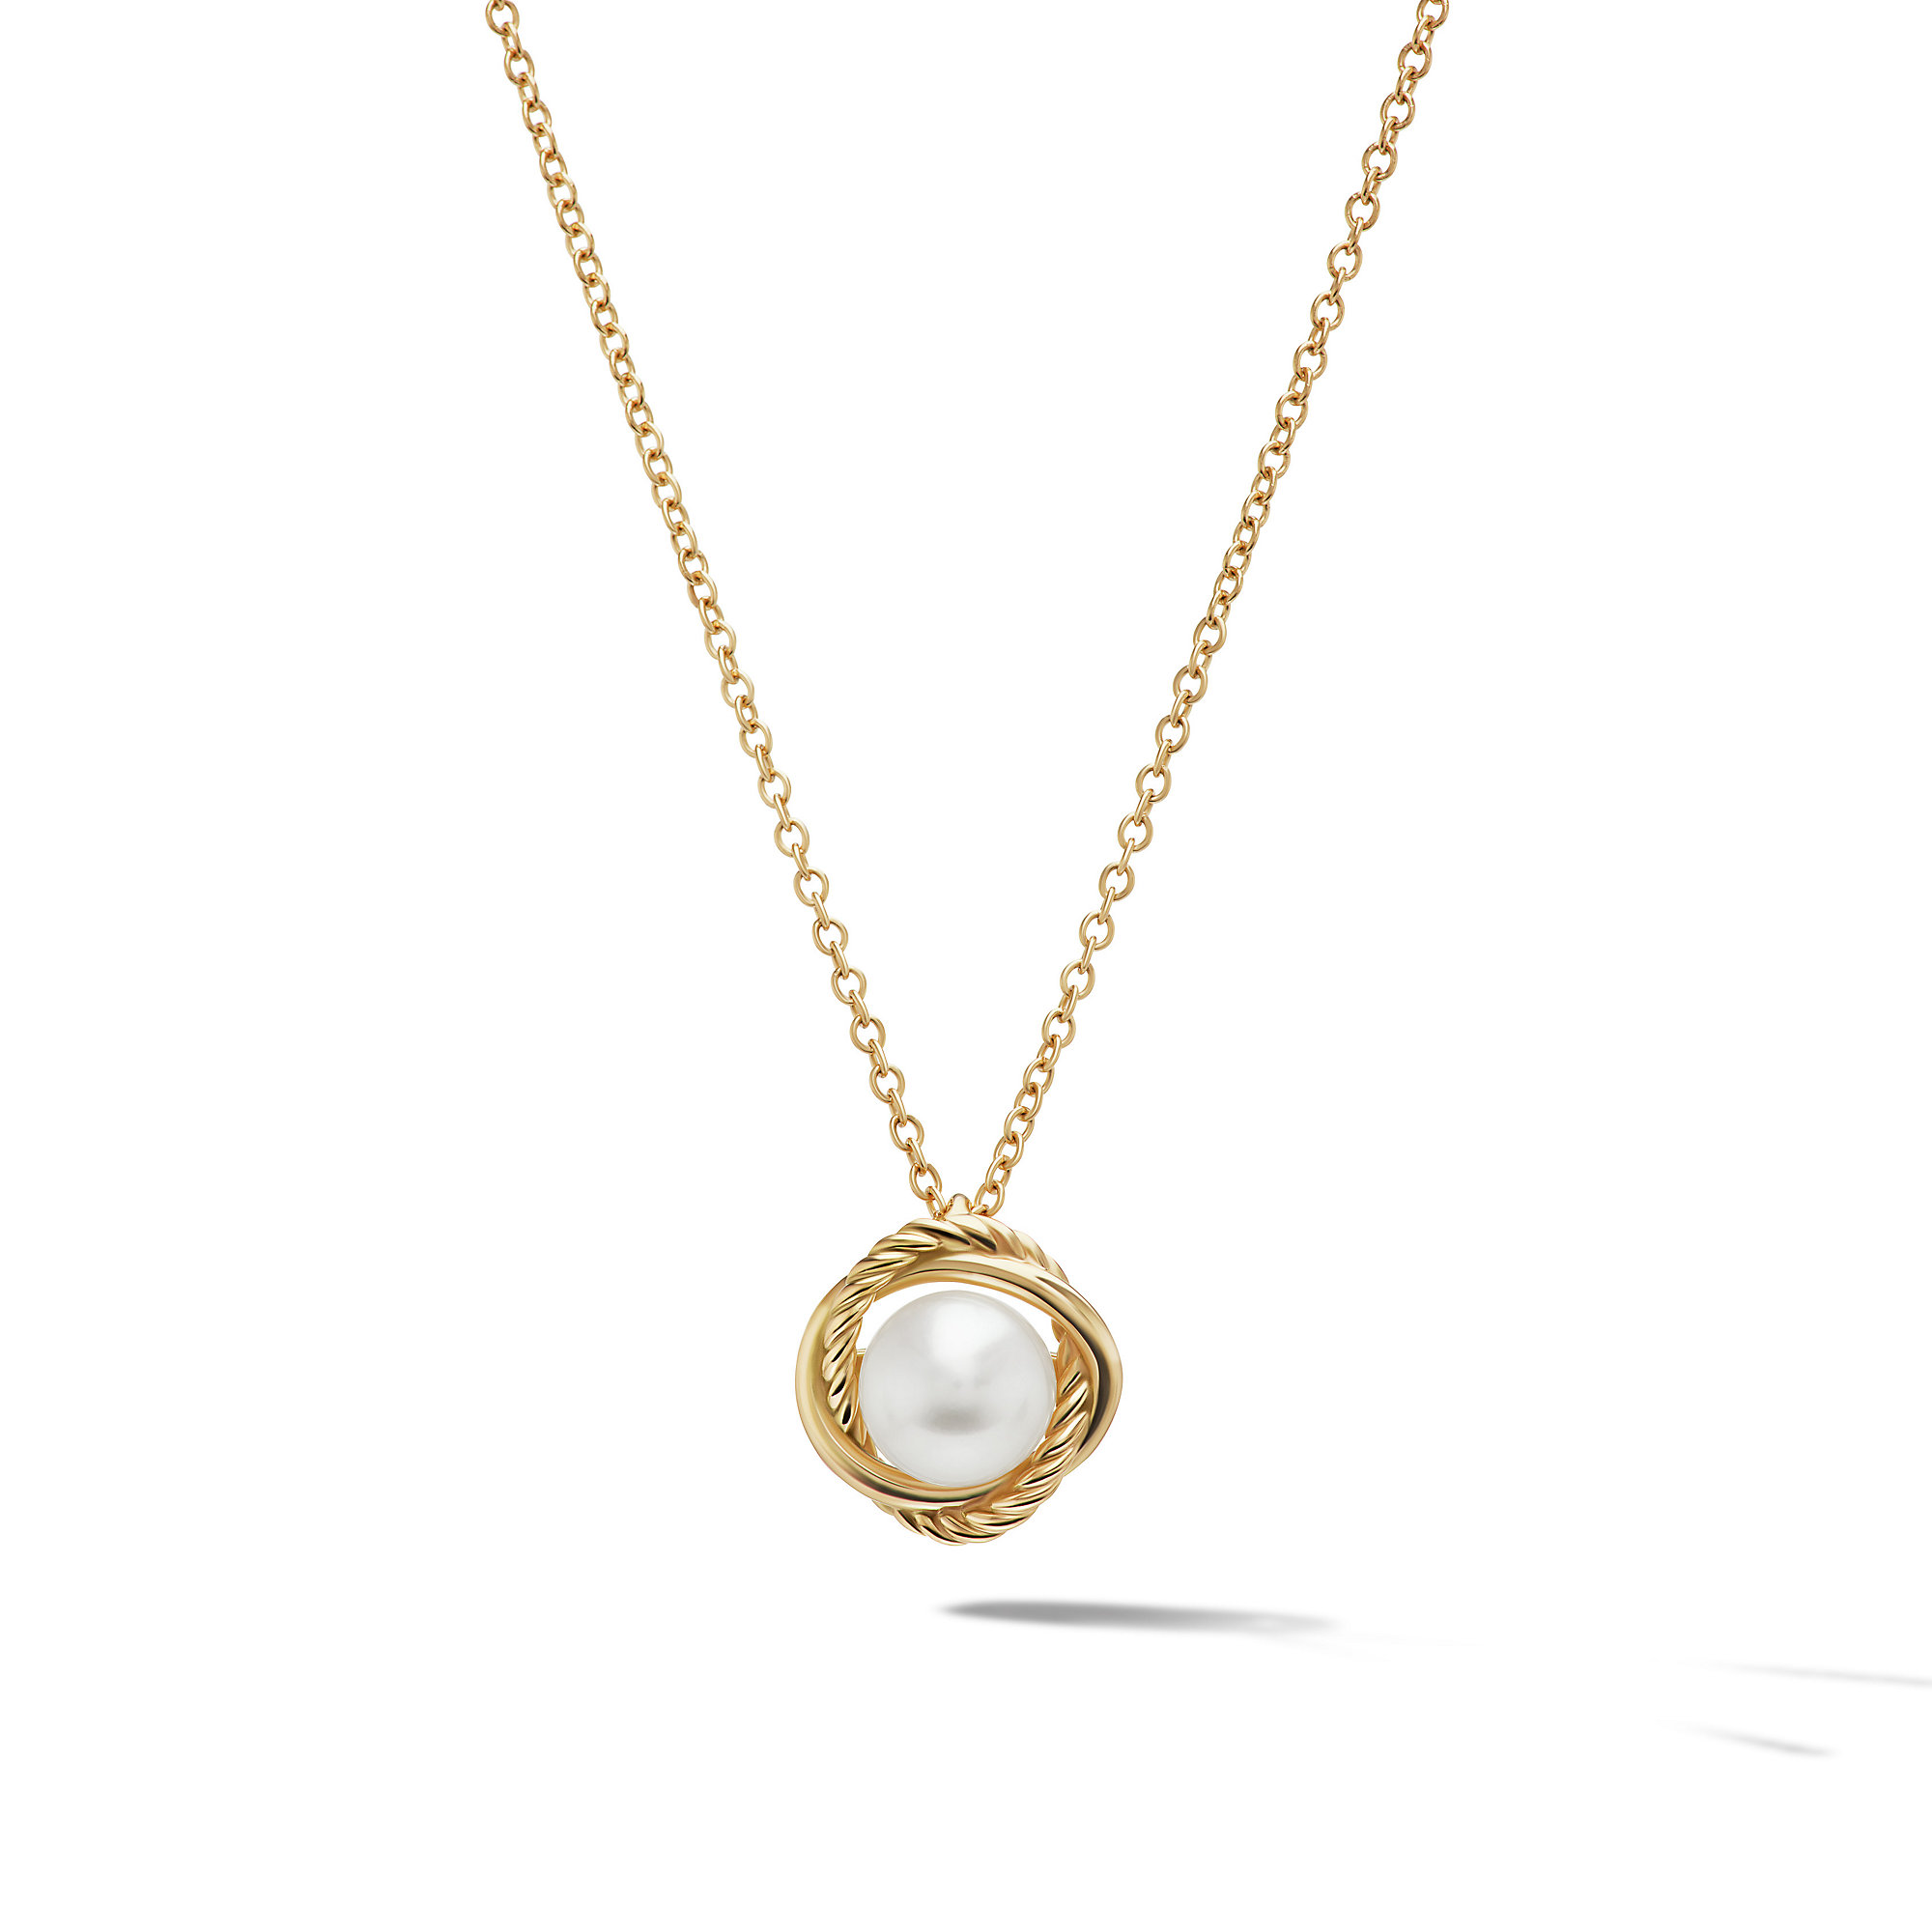 Infinity Pendant Necklace in 18K Yellow Gold with Pearl, 10mm